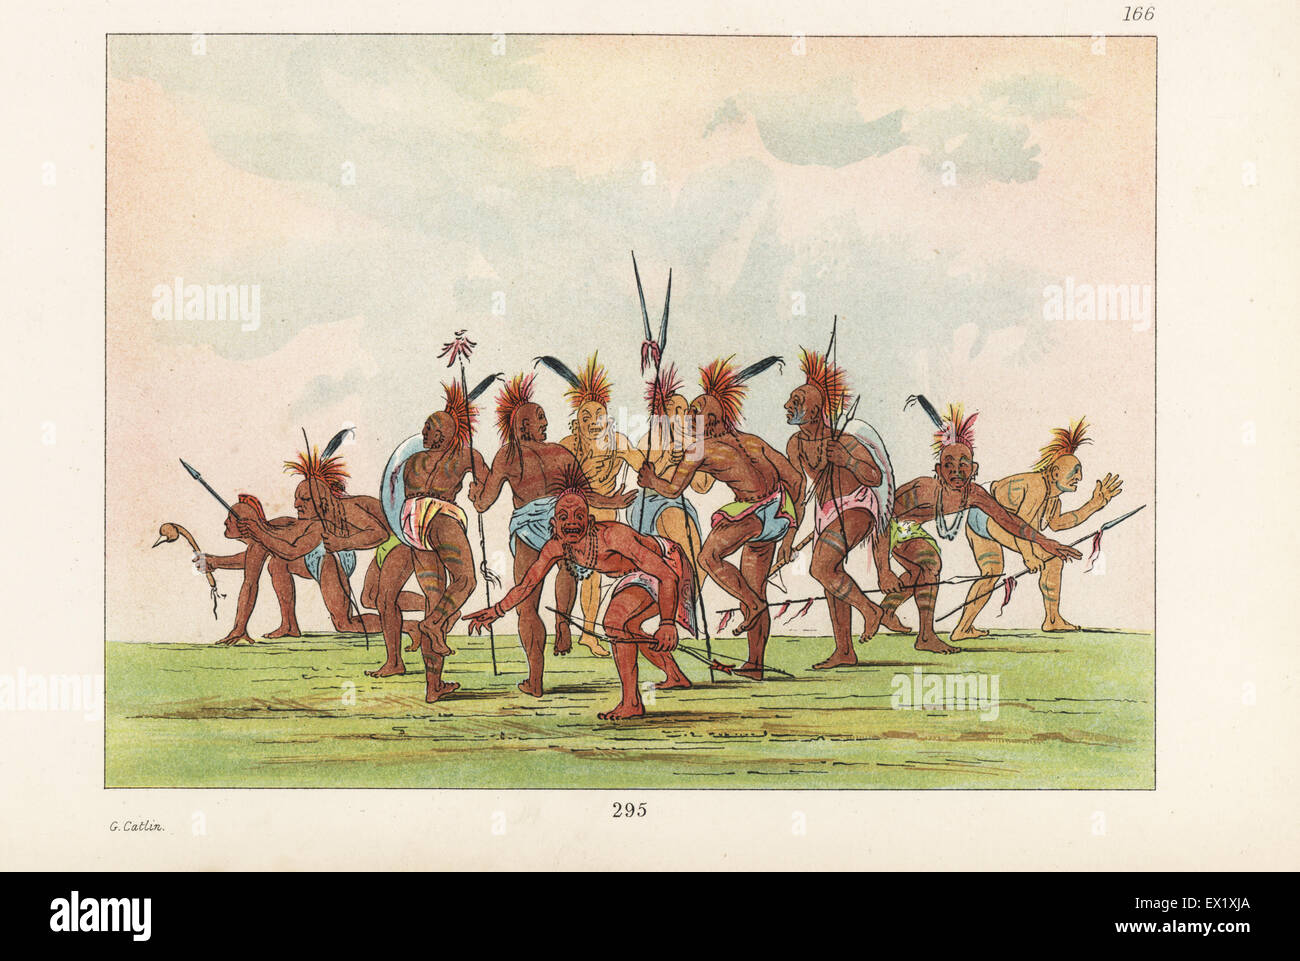 Meskwaki braves performing the Discovery Dance. Handcoloured lithograph from George Catlin's Manners, Customs and Condition of the North American Indians, London, 1841. Stock Photo